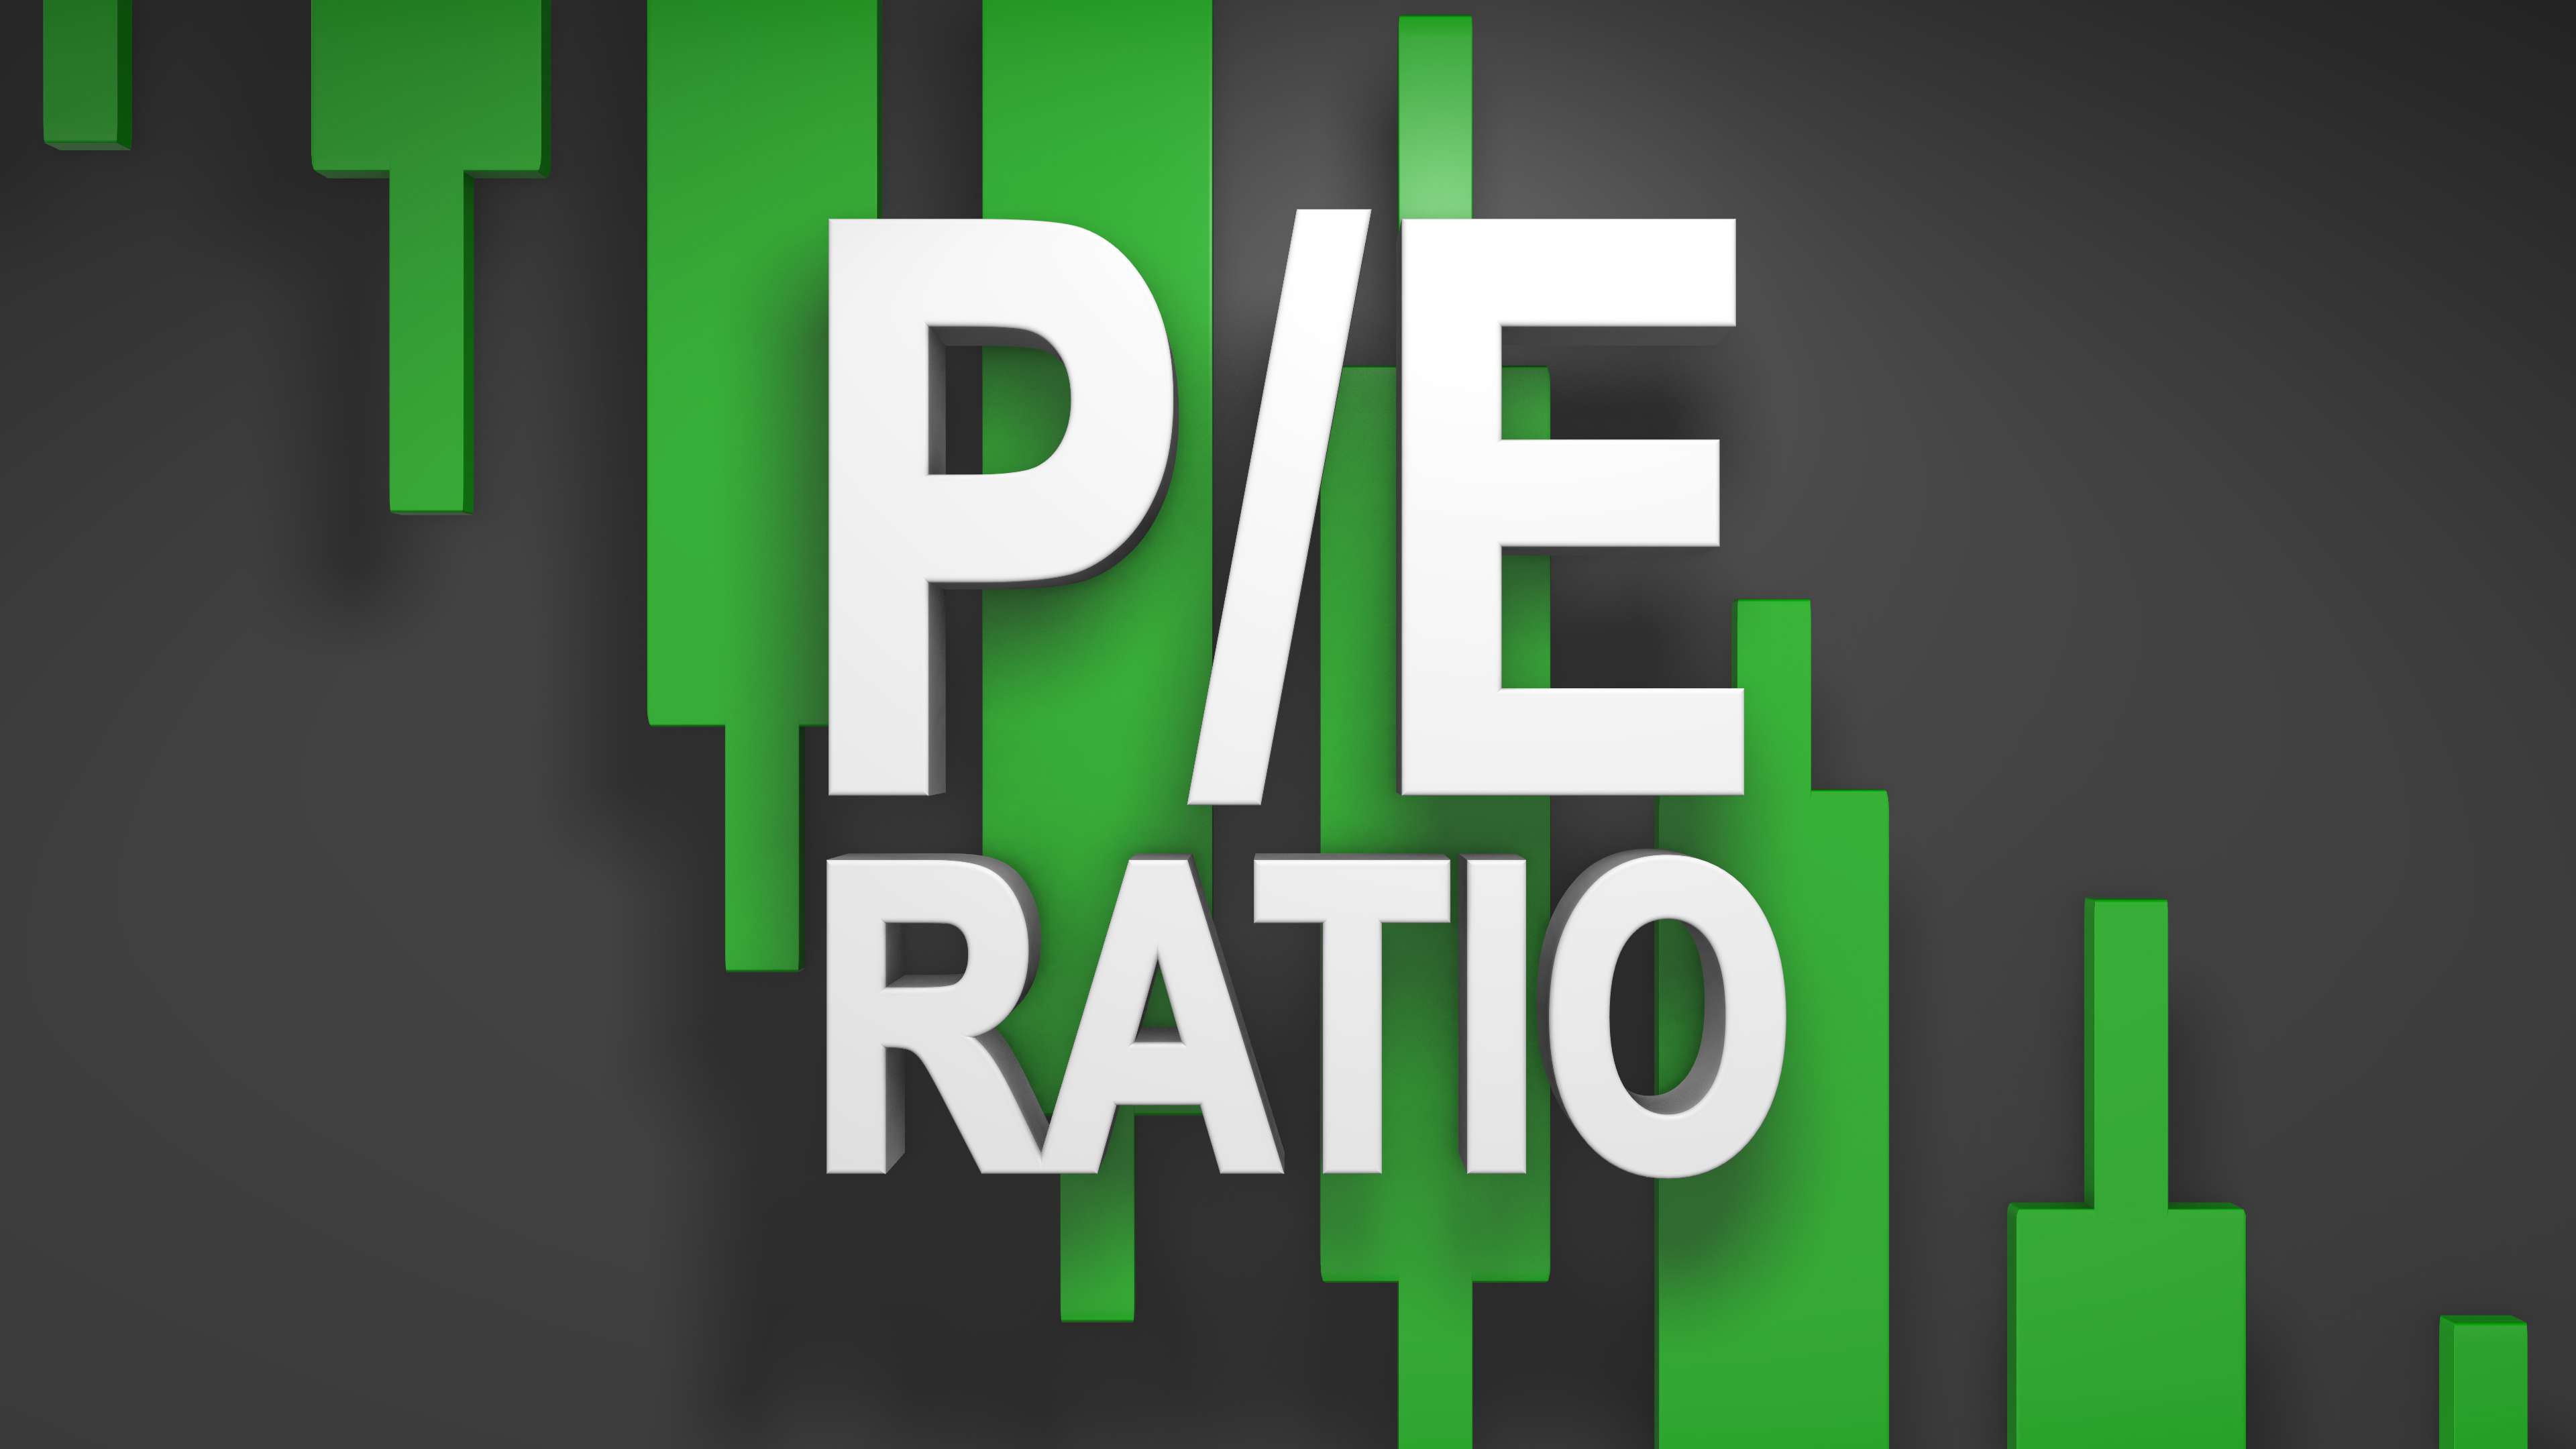 P/E ratio, price to earnings ratio 3D title for stock market.